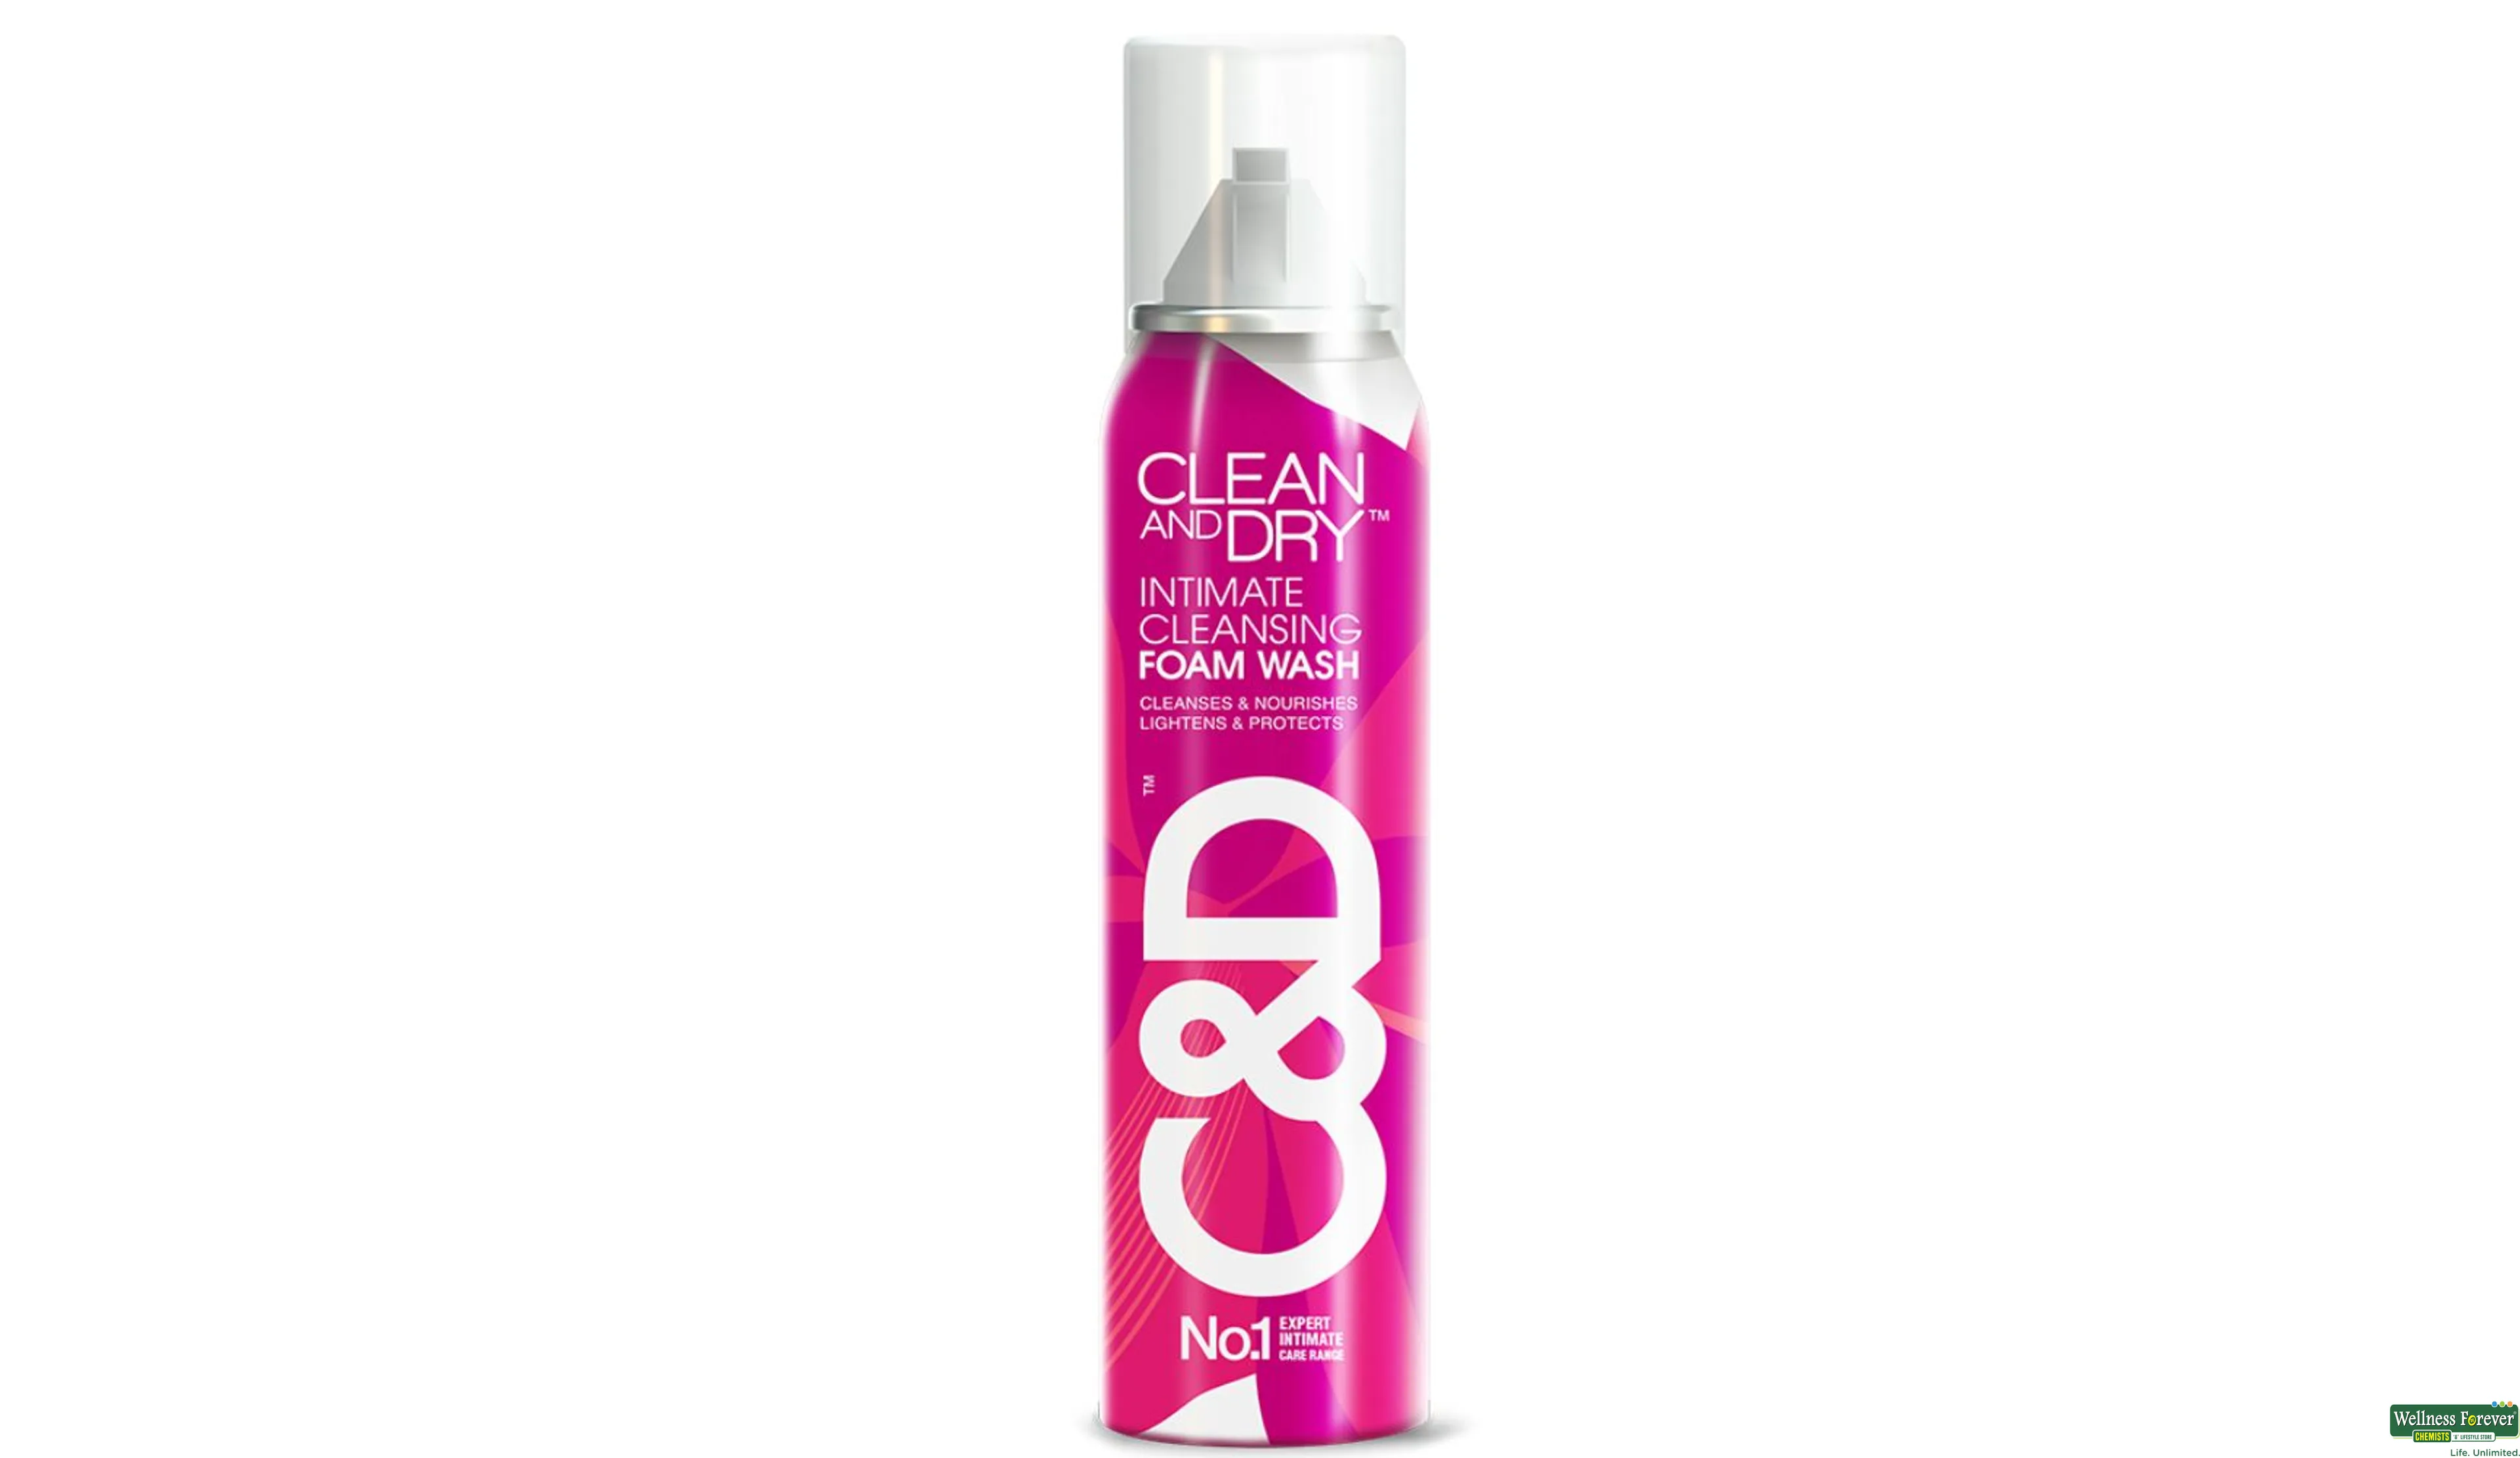 CLEAN AND DRY INTIMATE FOAM WASH 85GM- 2, 85GM, 